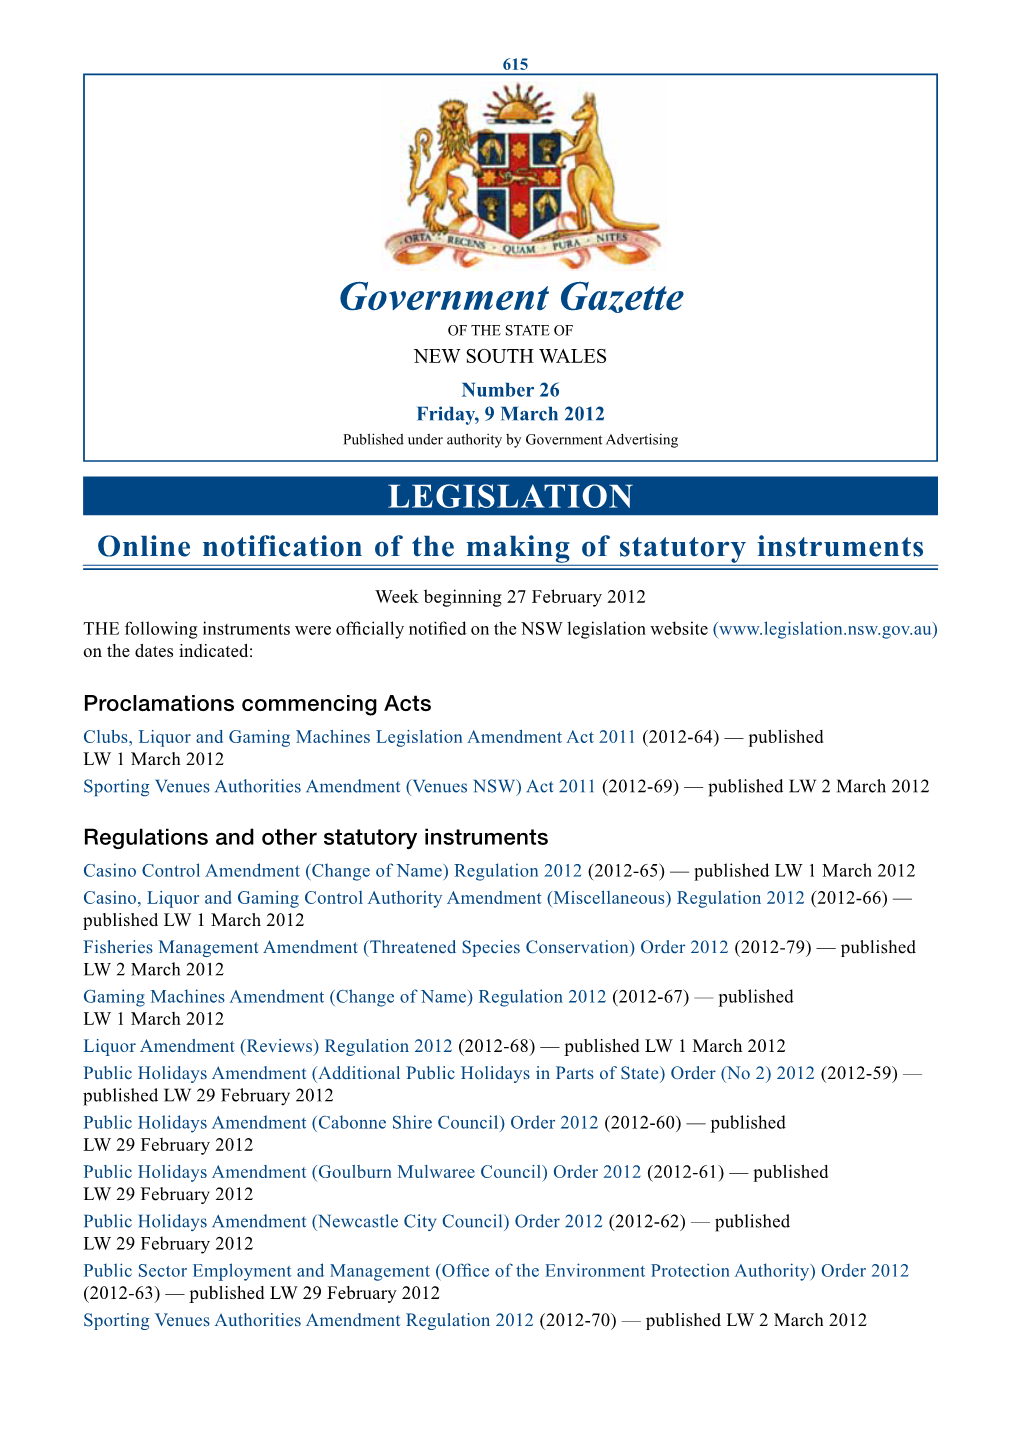 Government Gazette of the STATE of NEW SOUTH WALES Number 26 Friday, 9 March 2012 Published Under Authority by Government Advertising